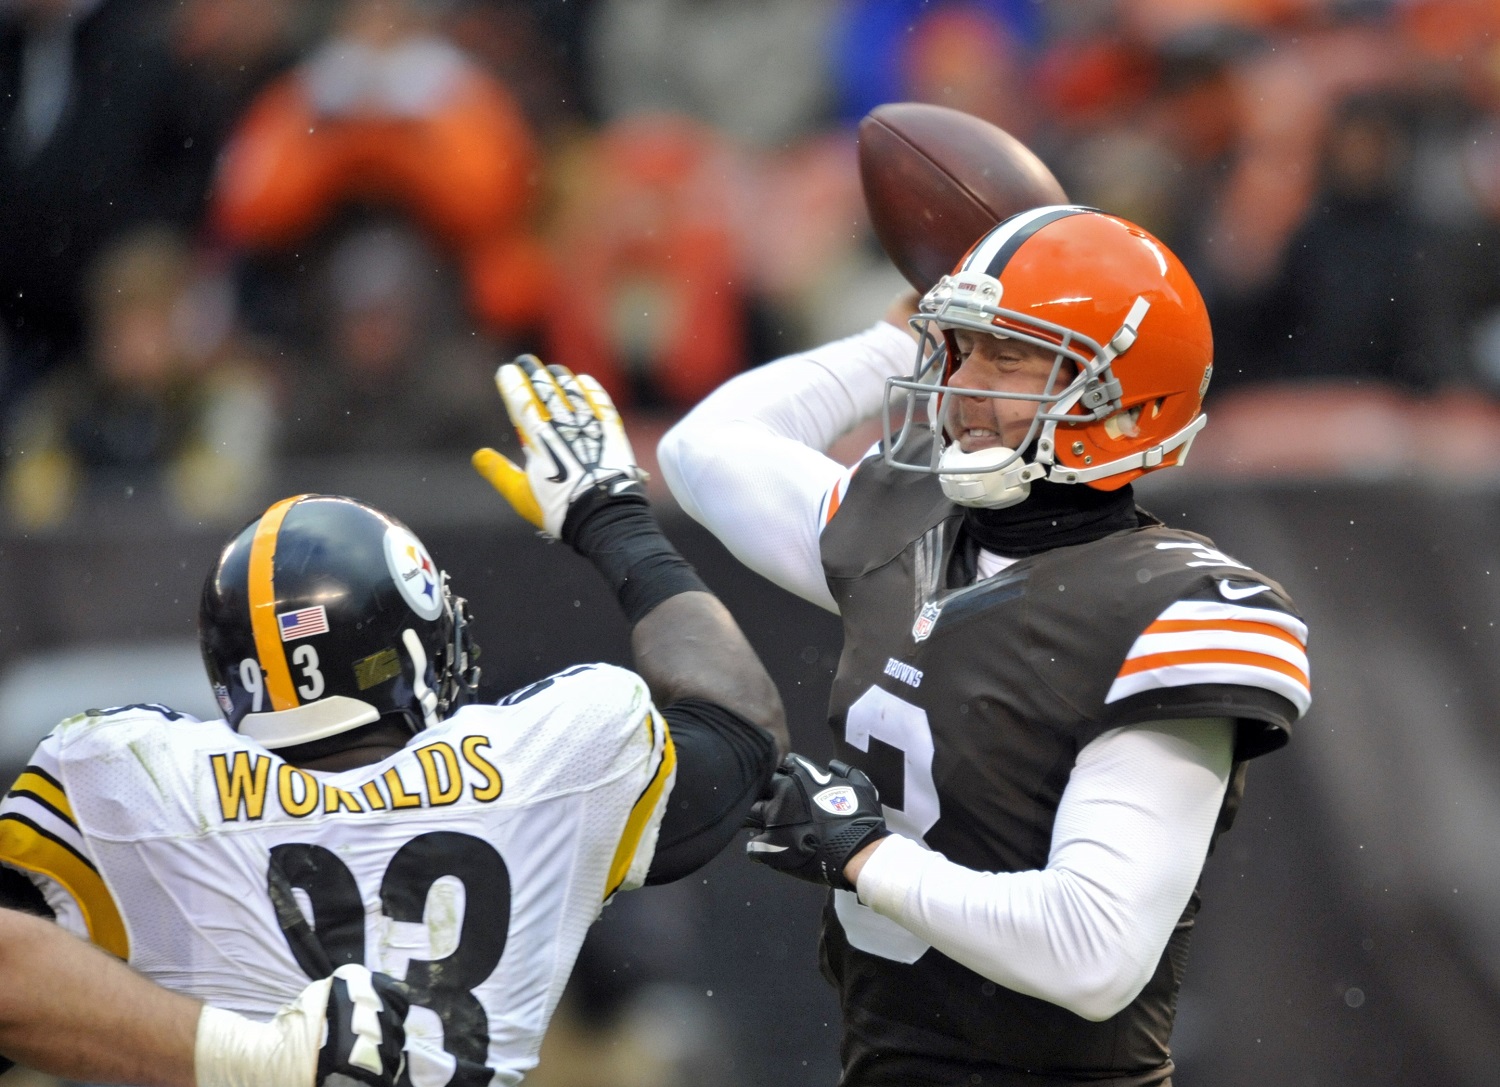 Cleveland Browns quarterback Brandon Weeden throws incomplete under pressure from Pittsburgh Steelers linebacker Jason Worilds in the fourth quarter of an NFL football game Sunday, Nov. 24, 2013. (AP Photo/David Richard)